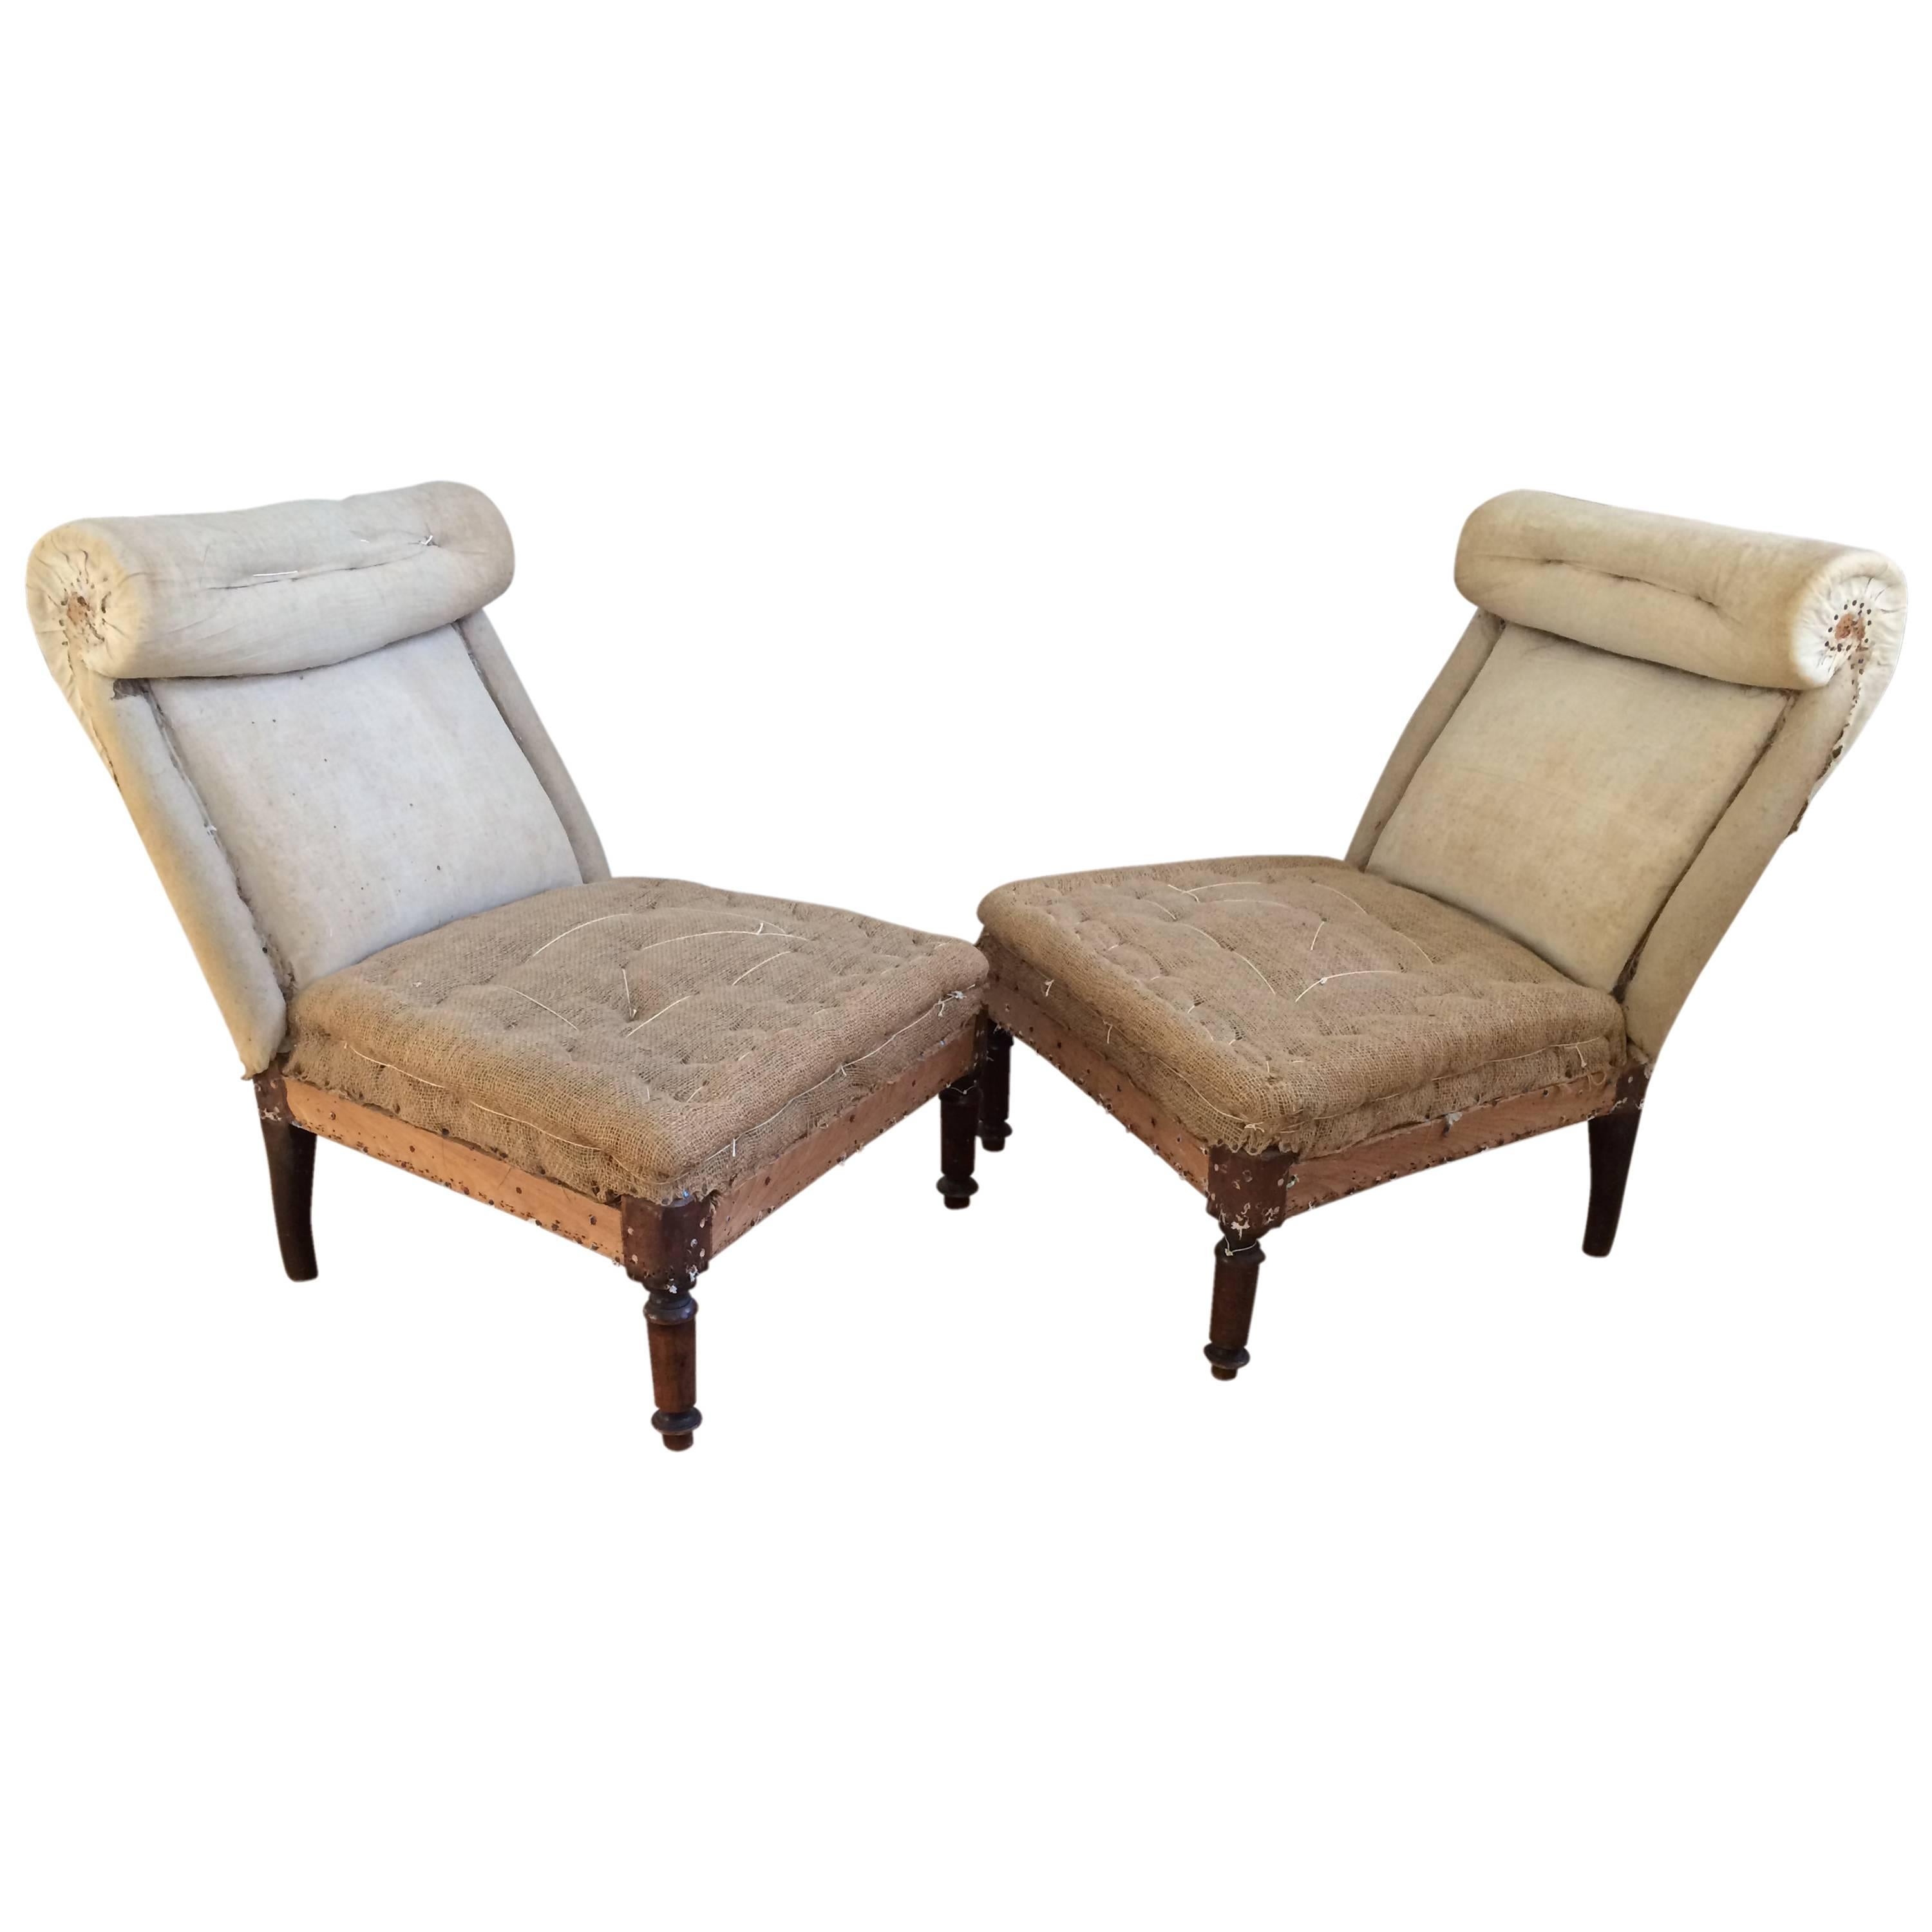 19th Century French Scroll Back Slipper Chairs For Sale